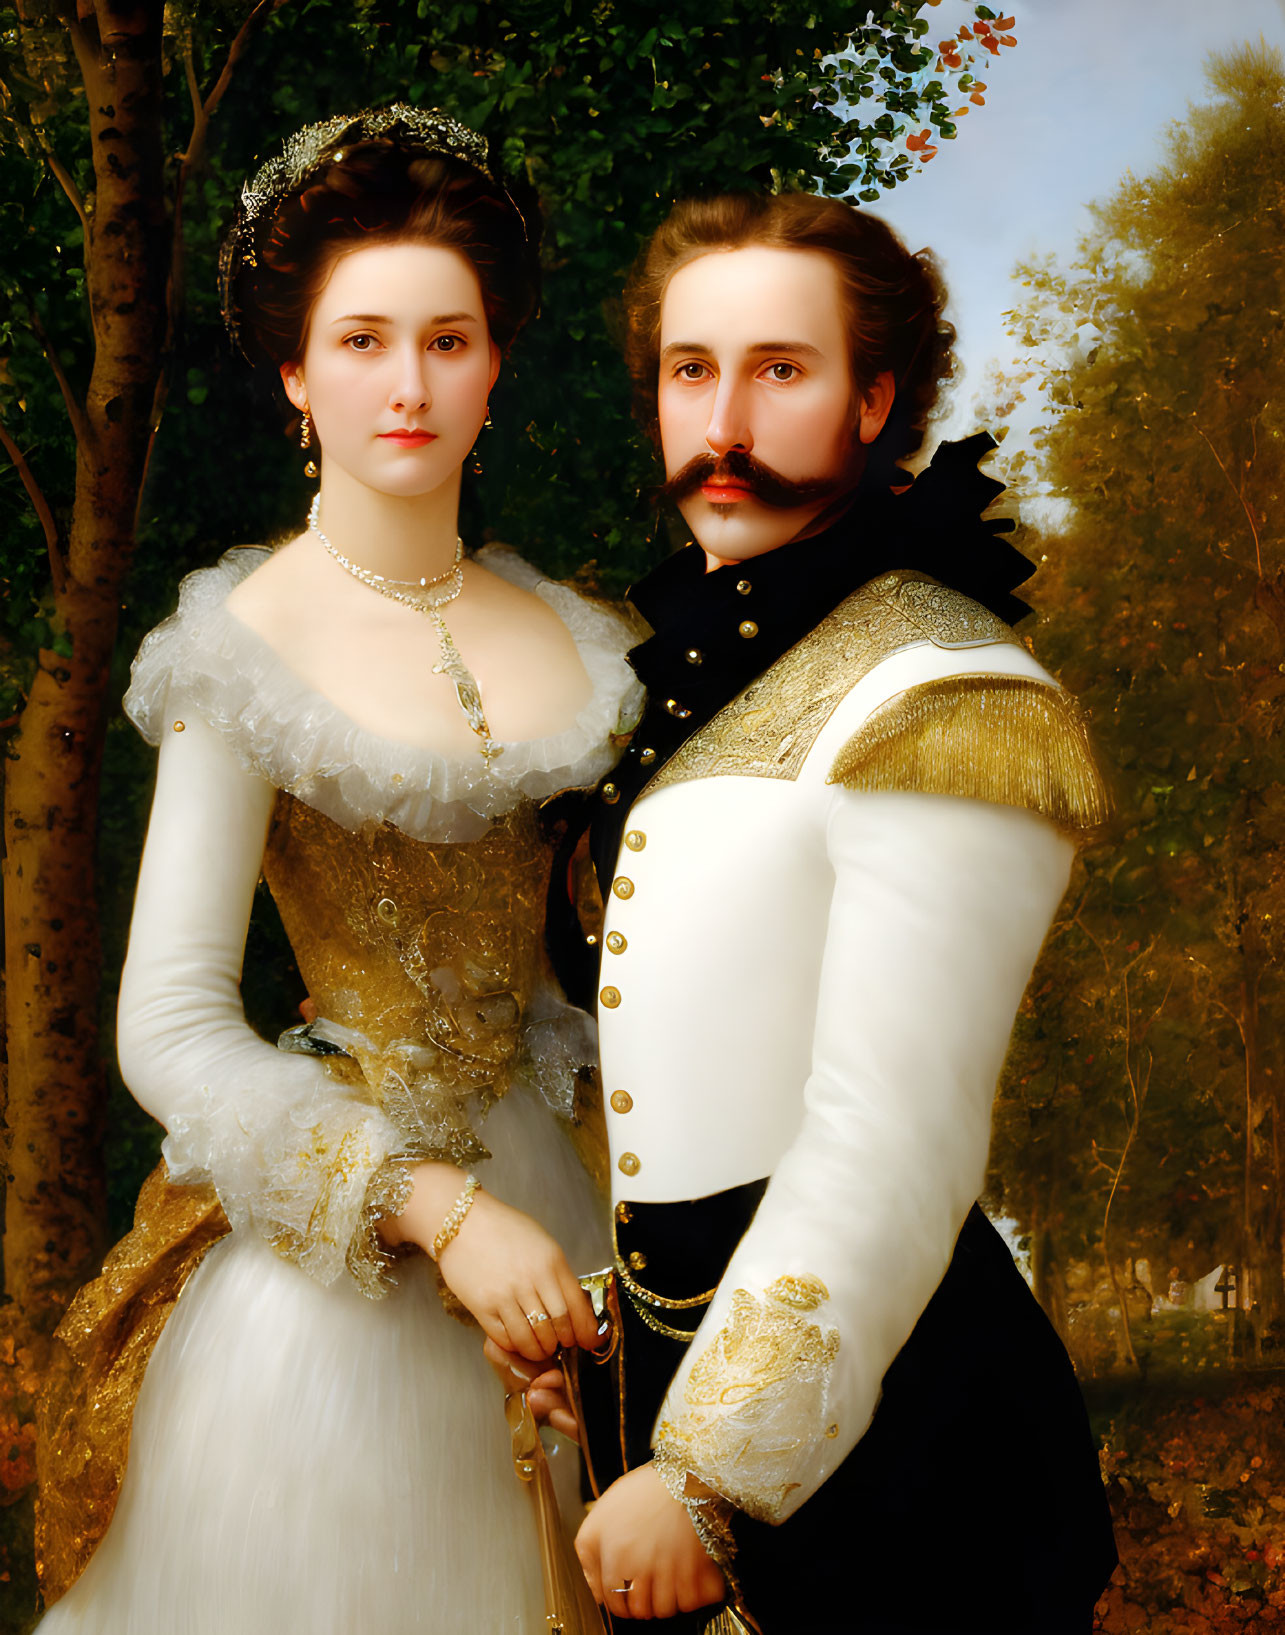 Autumnal forest backdrop with woman in white dress and man in military uniform